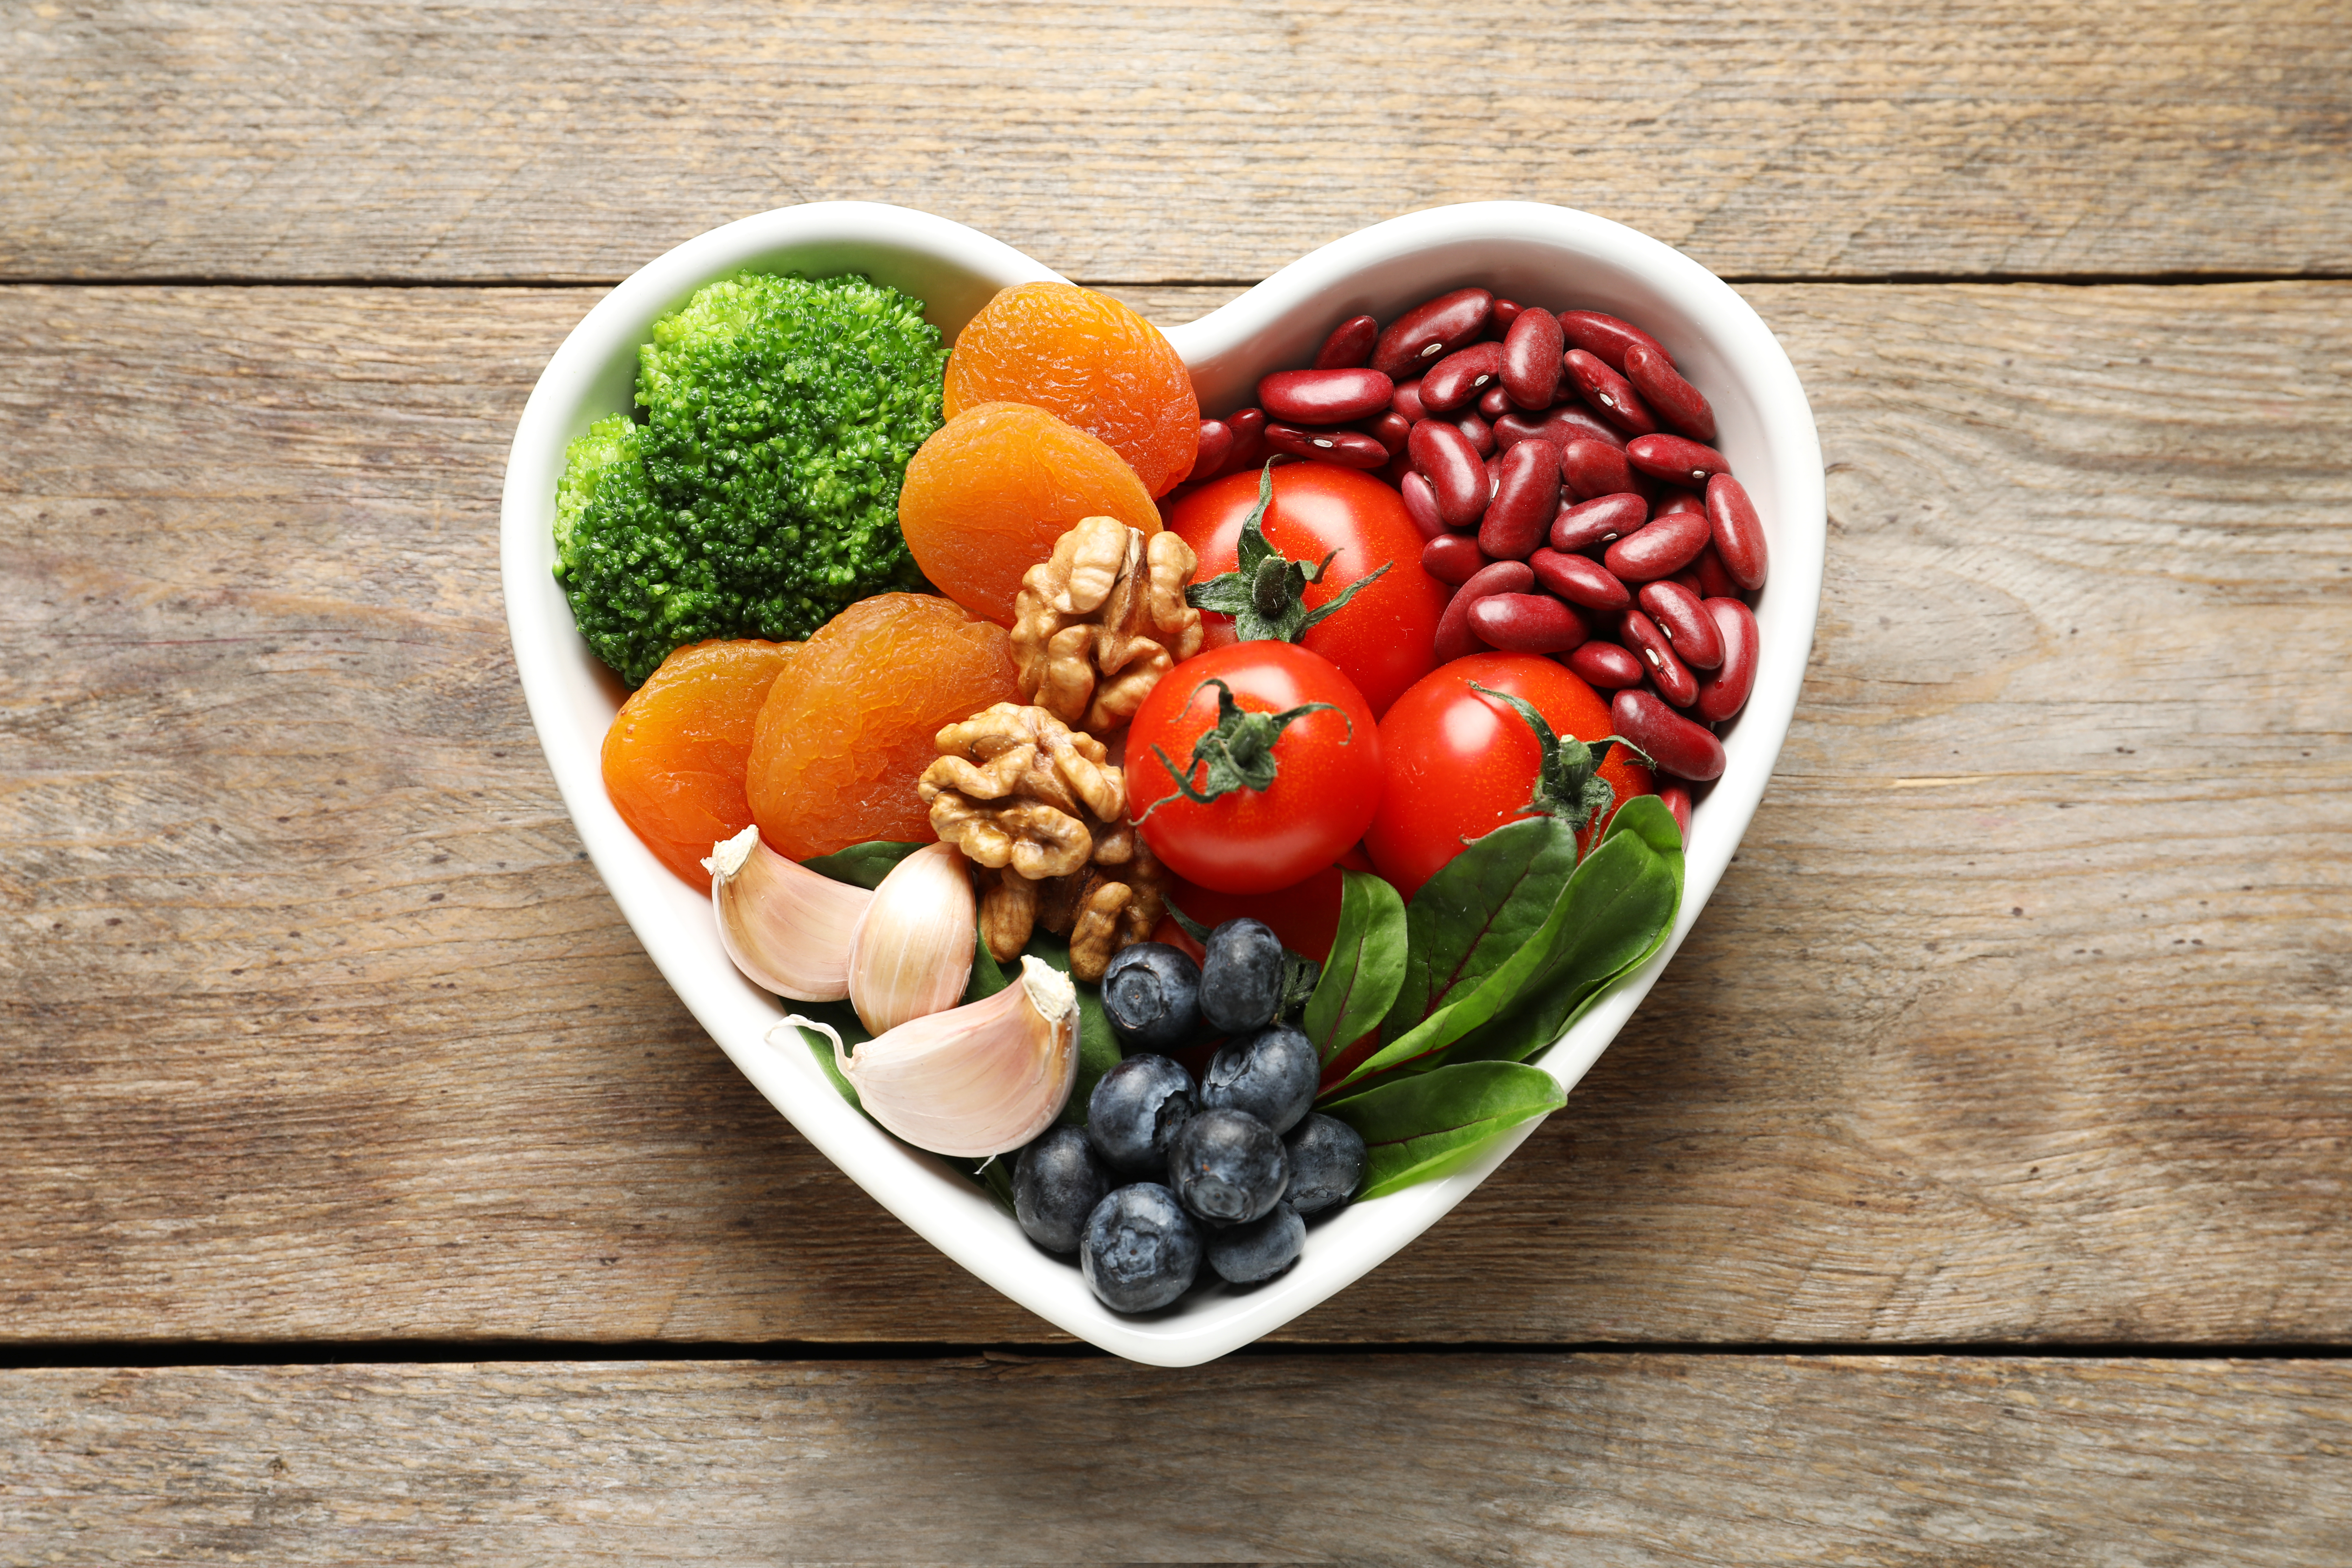 Heart-shaped bowl full of different fruits and vegtables